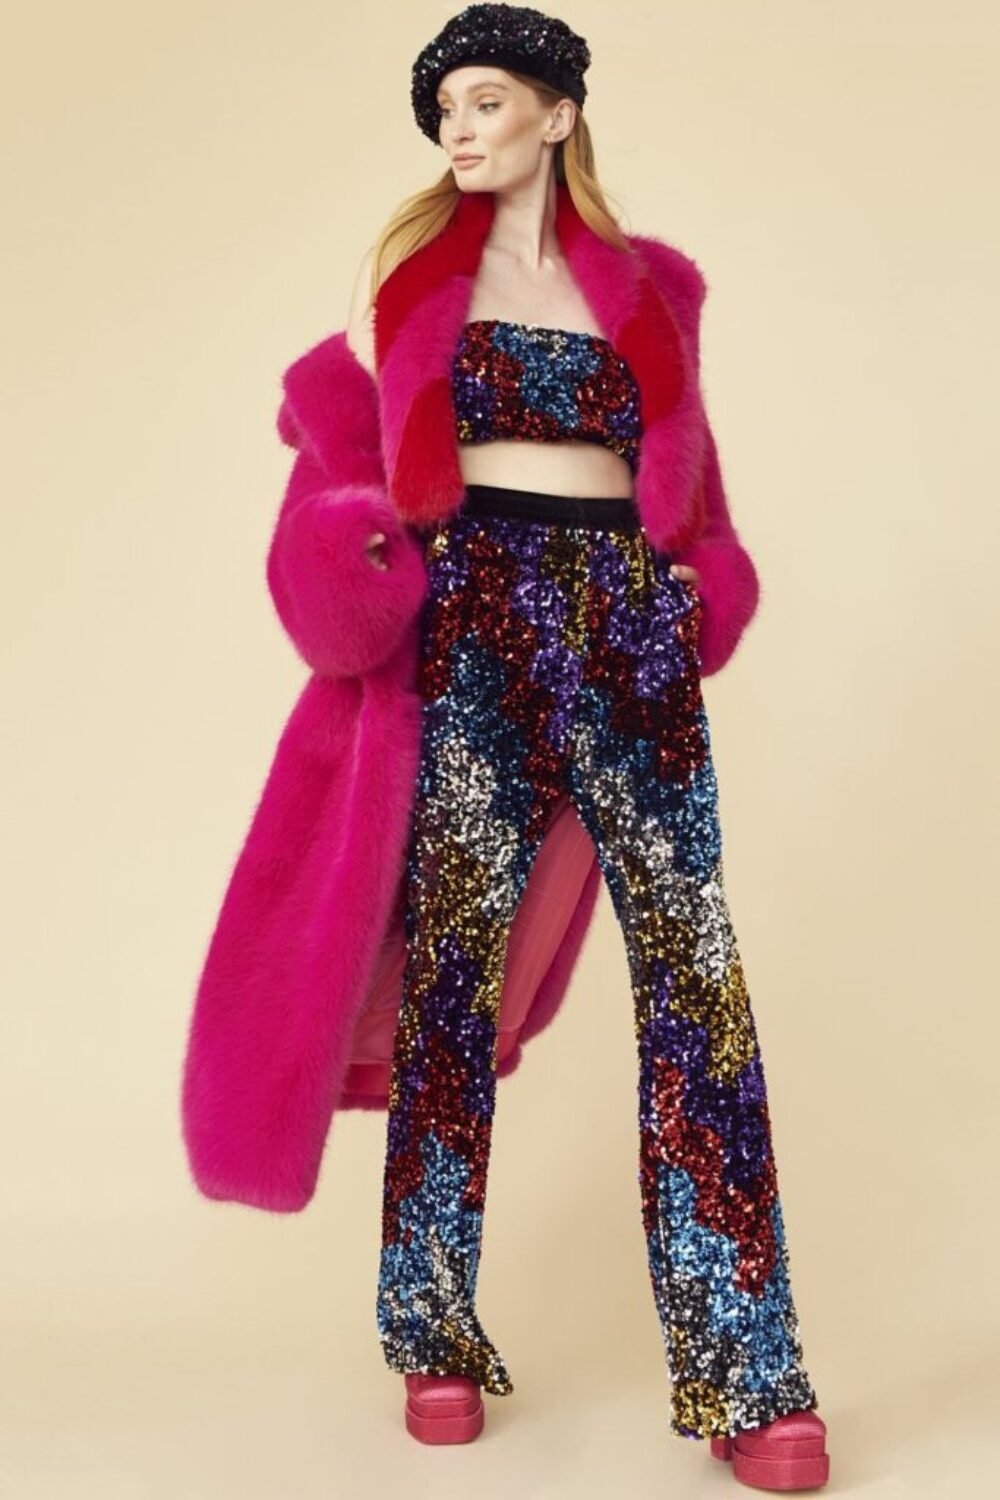 Shop Lux Pink Knitted Bamboo Faux Fur Maxi Coat and women's luxury and designer clothes at www.lux-apparel.co.uk